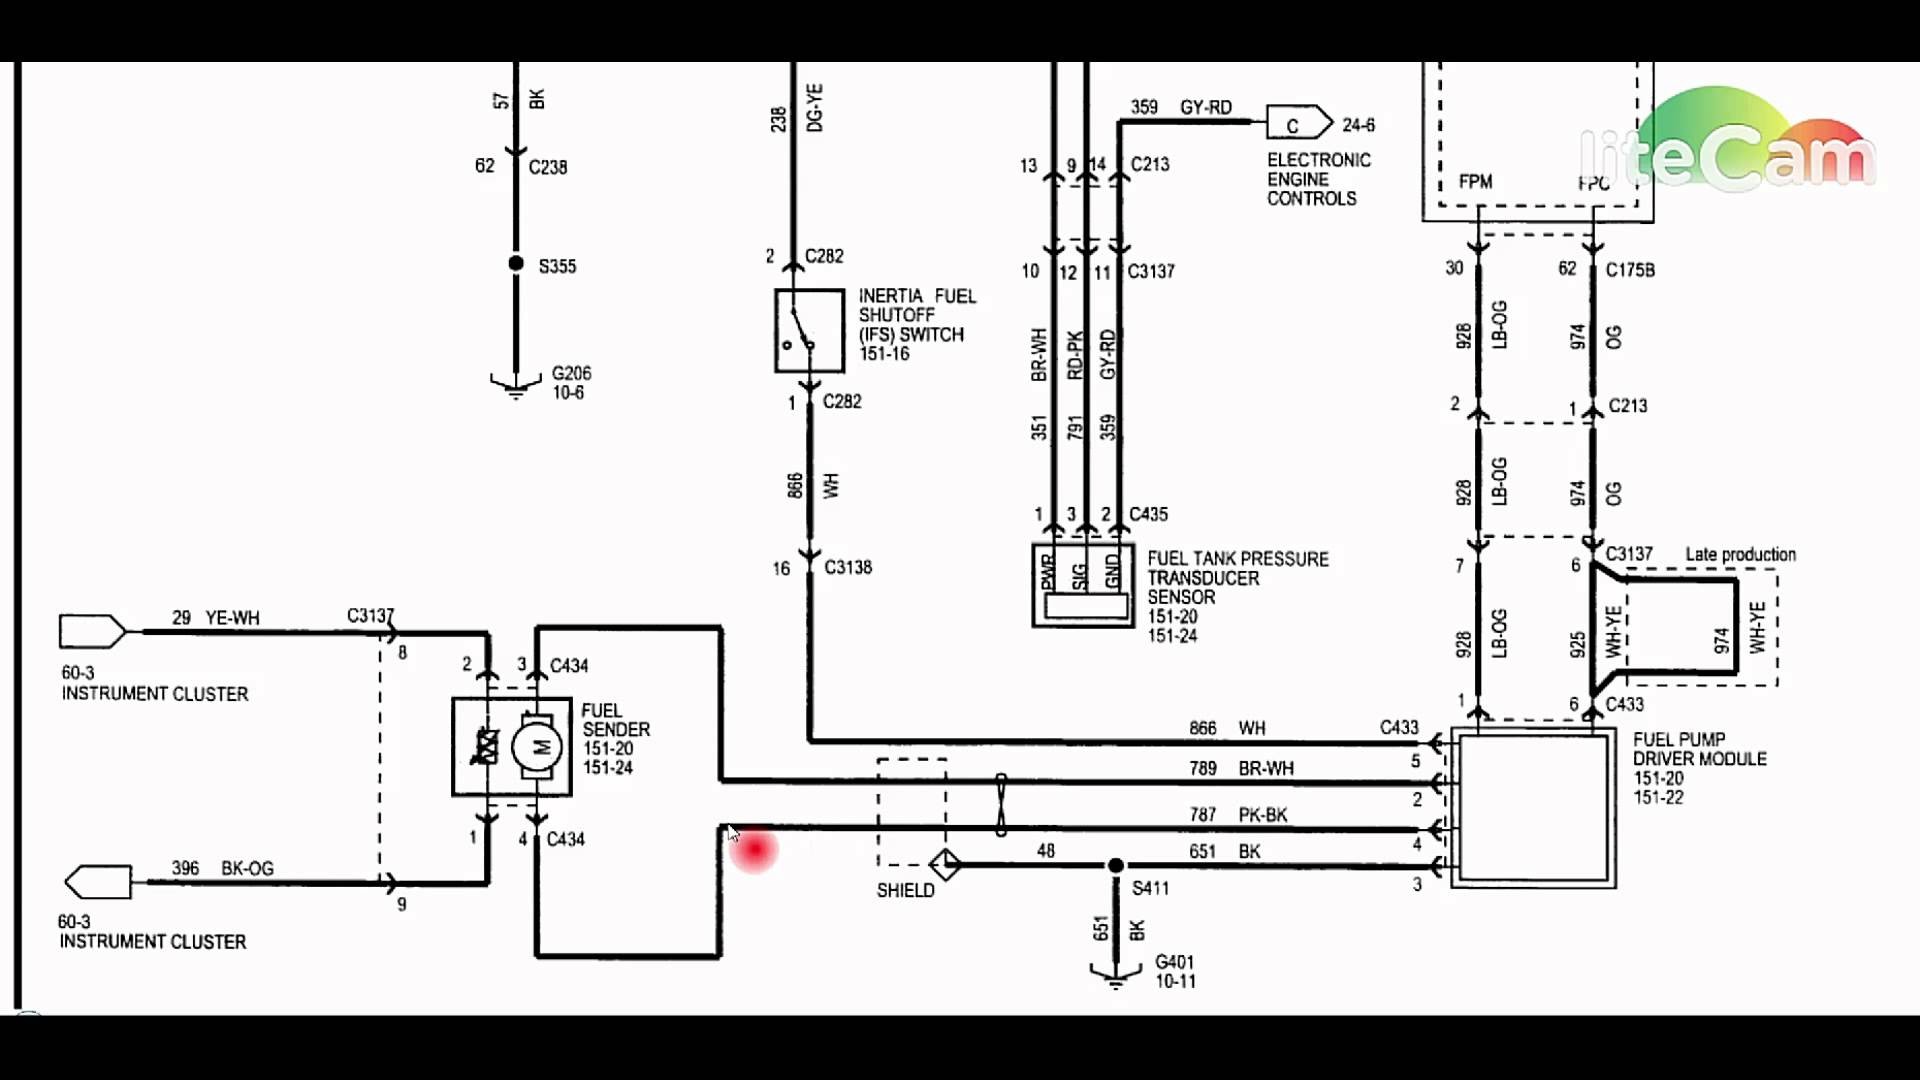 Ford F150 Wiring Diagrams Panel Diagram 1997 ford 1988 ford F150 Fuel Pump Wiring Diagram More Of Ford F150 Wiring Diagrams